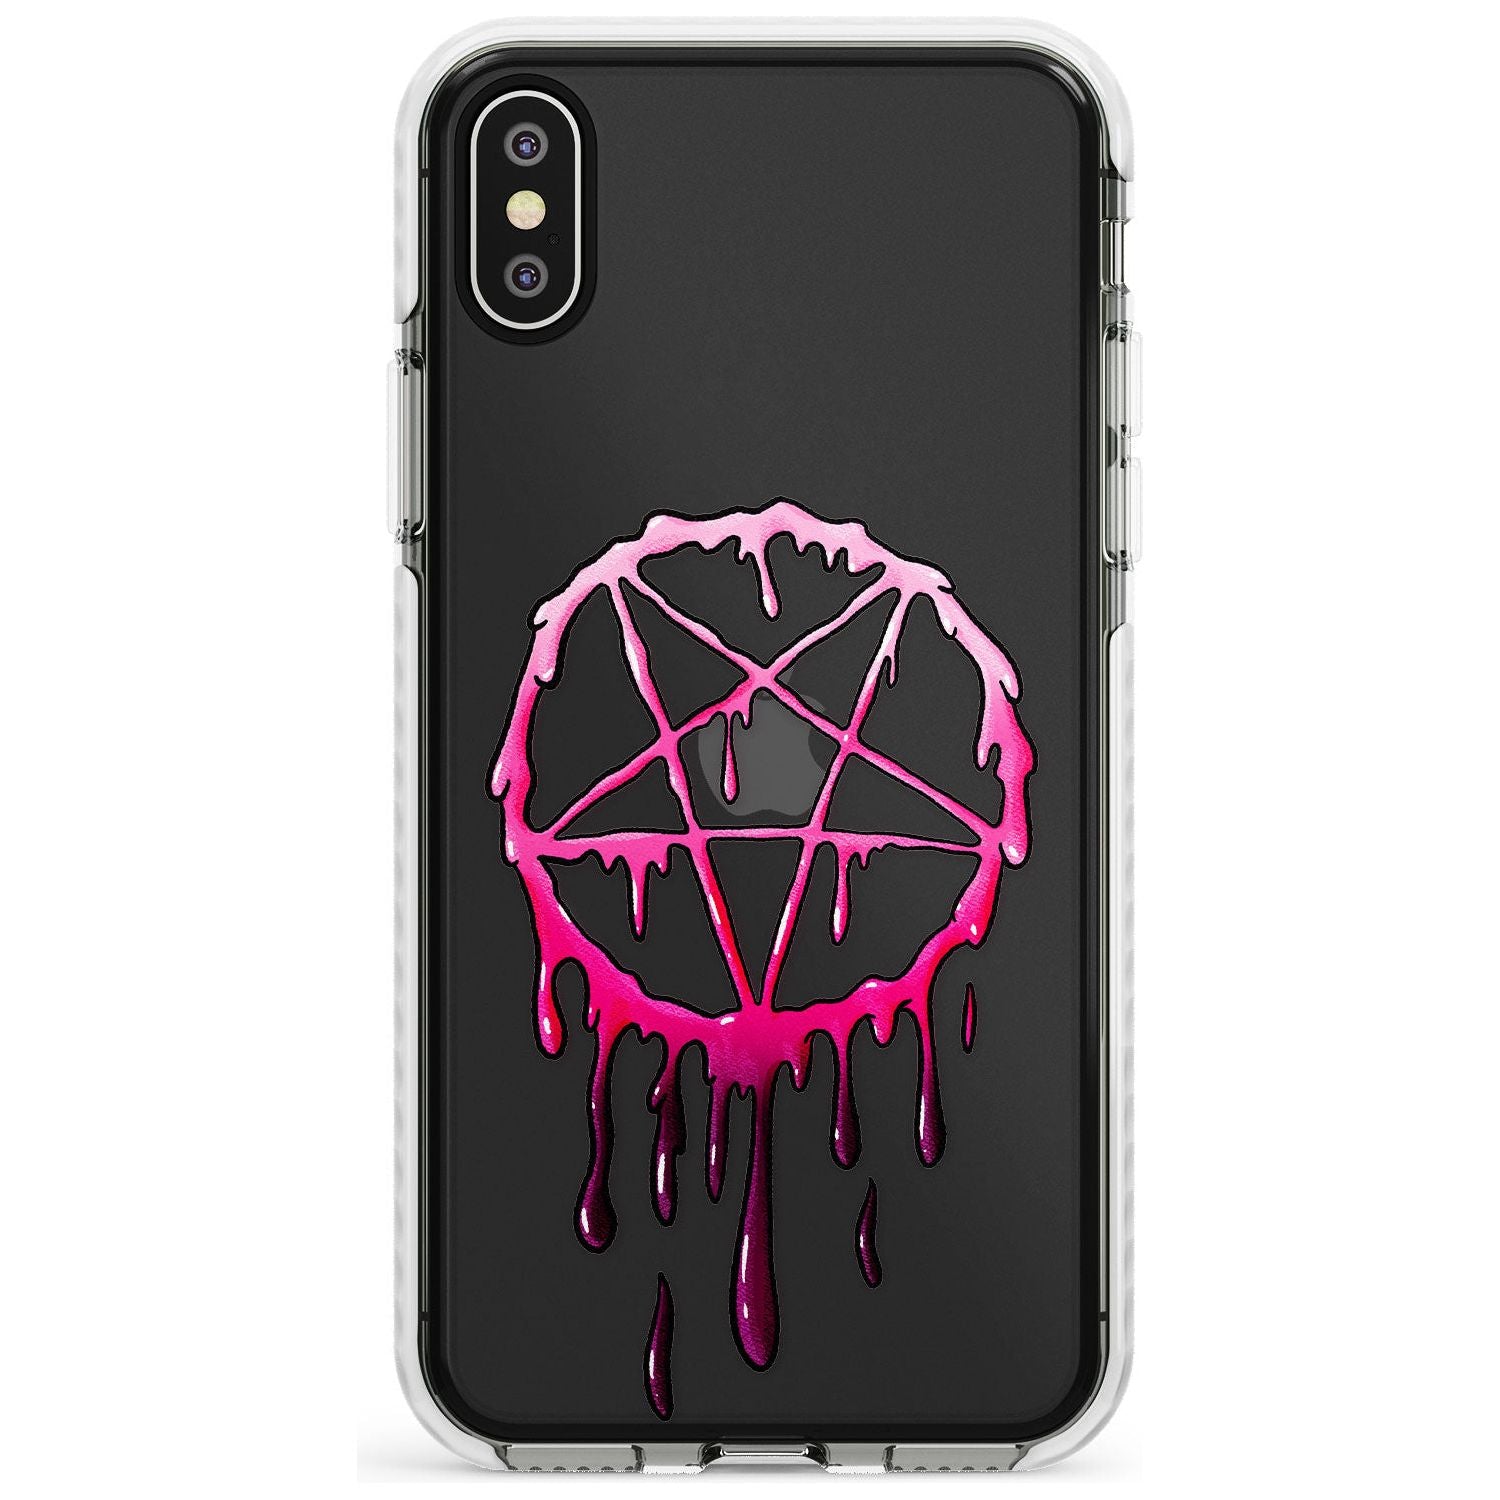 Pentagram of Blood Impact Phone Case for iPhone X XS Max XR